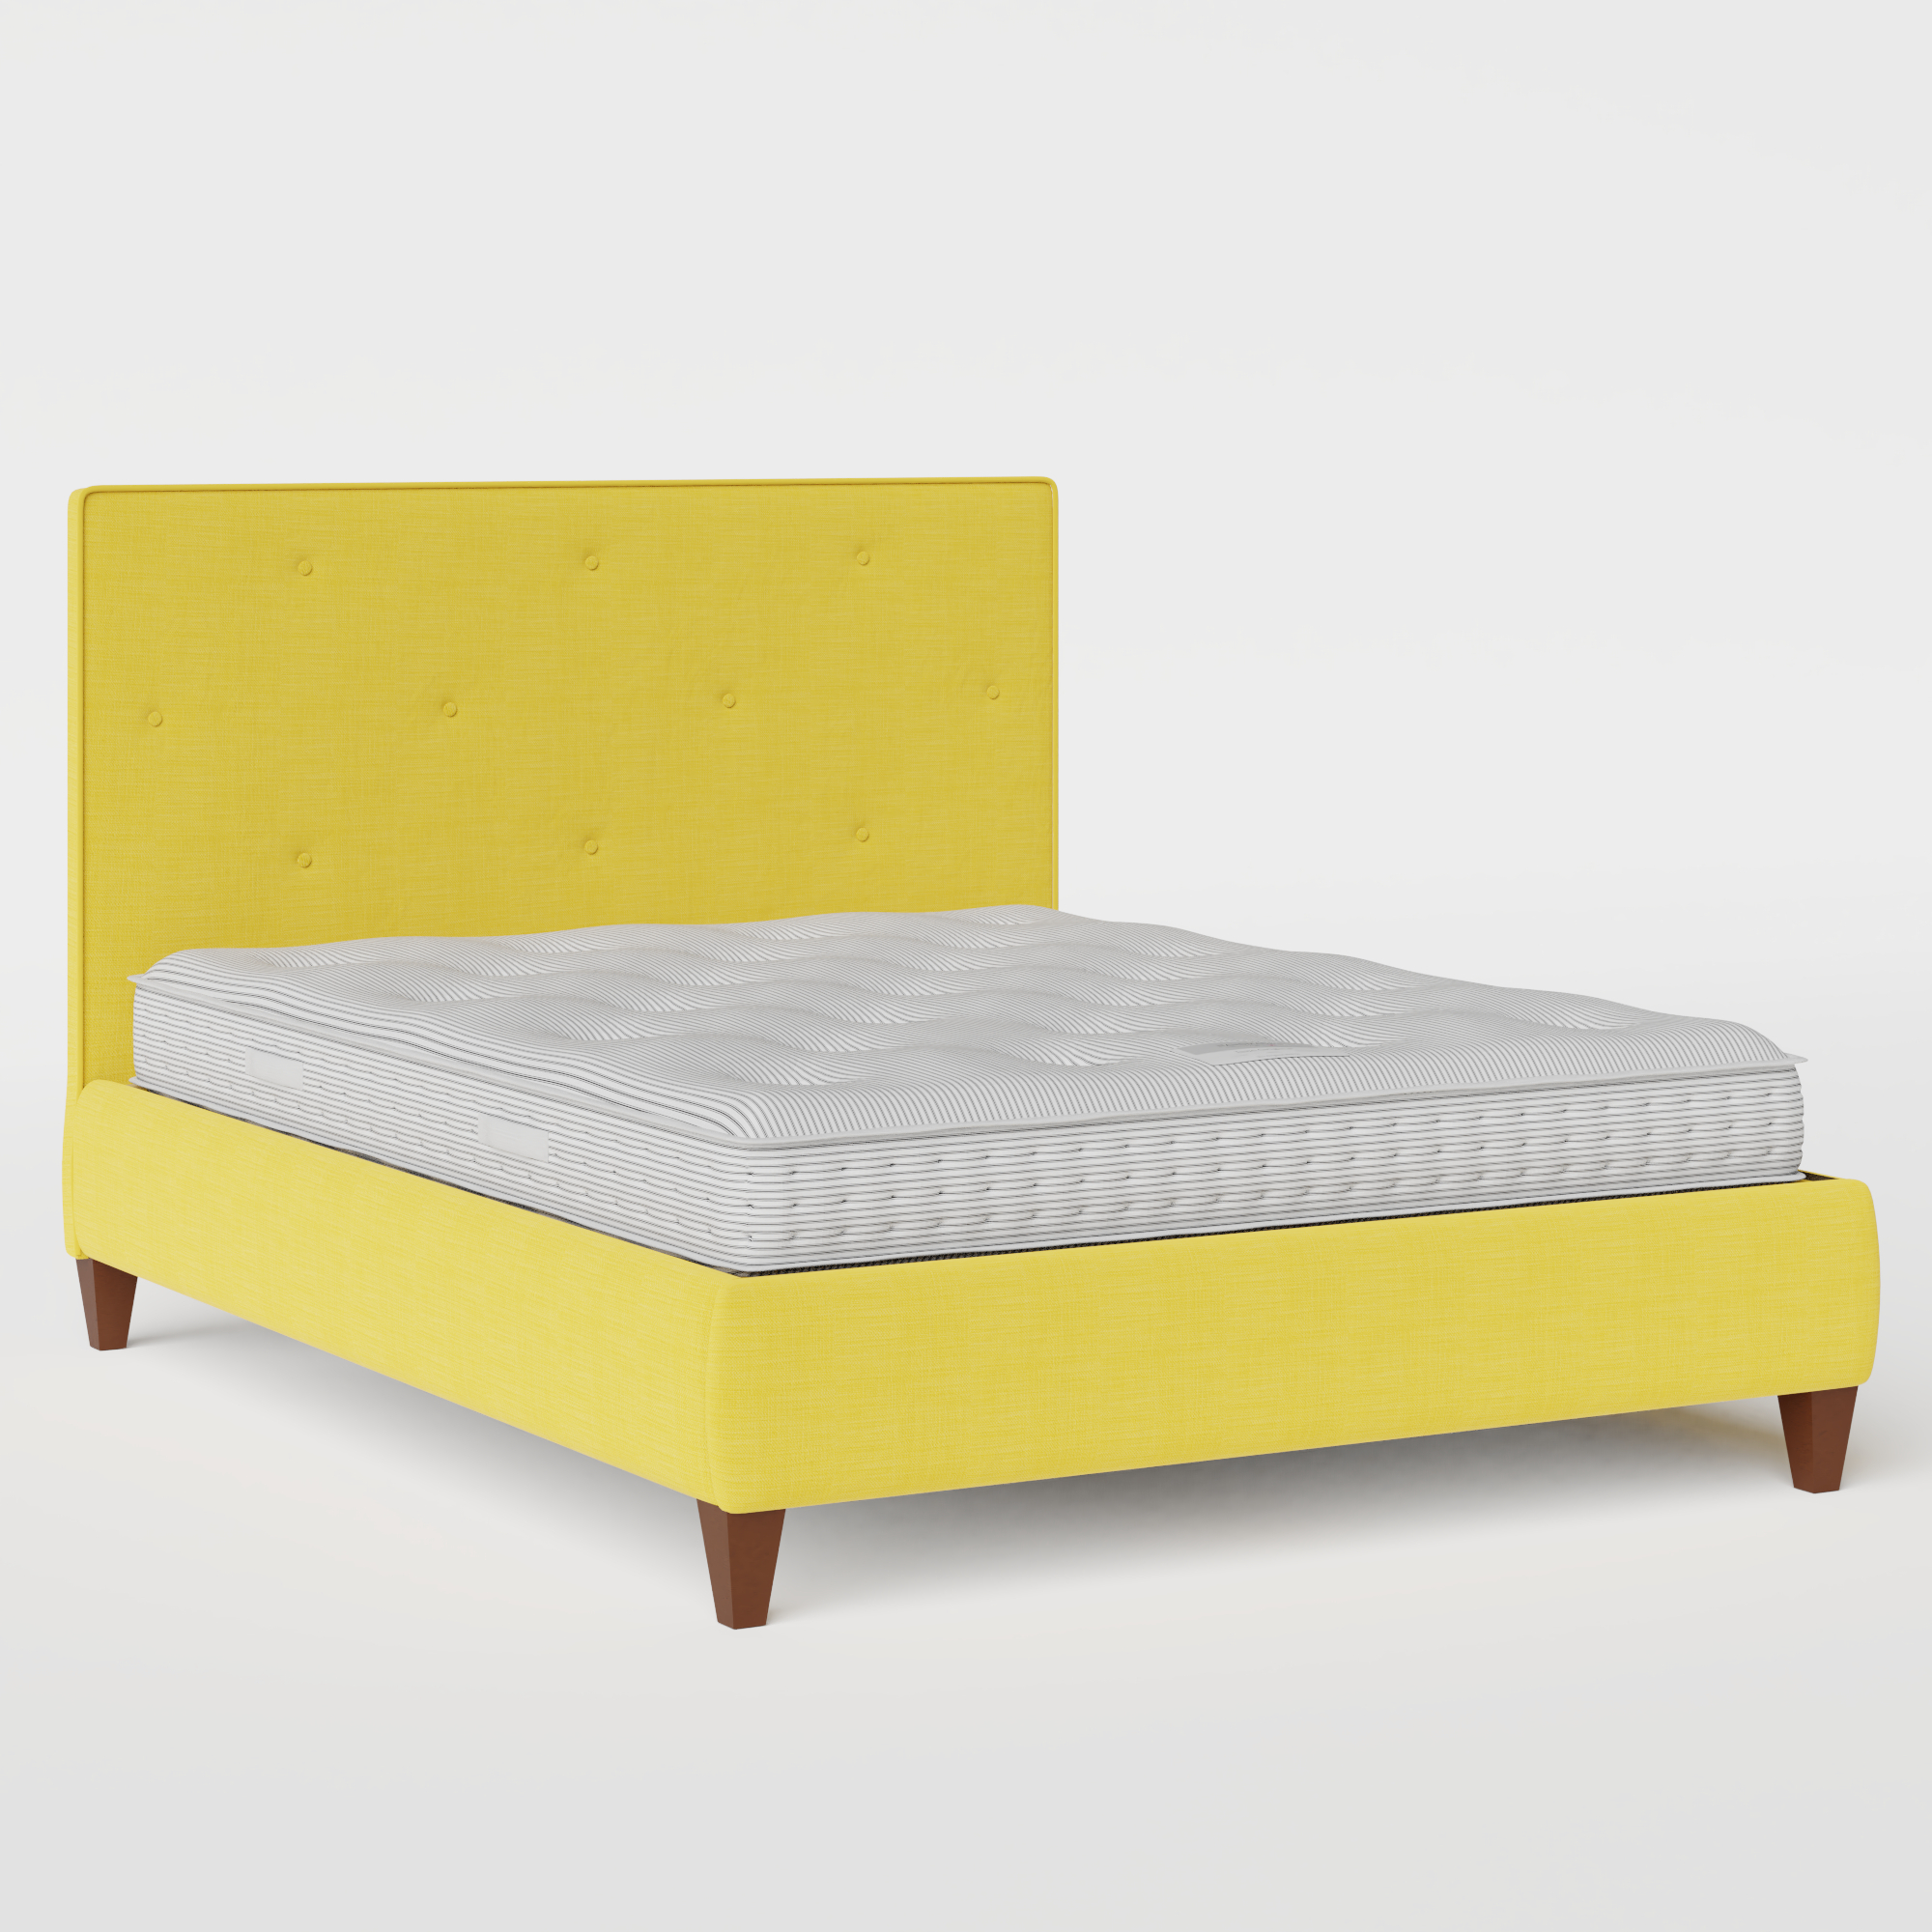 Yushan Buttoned Diagonal stoffen bed in sunflower